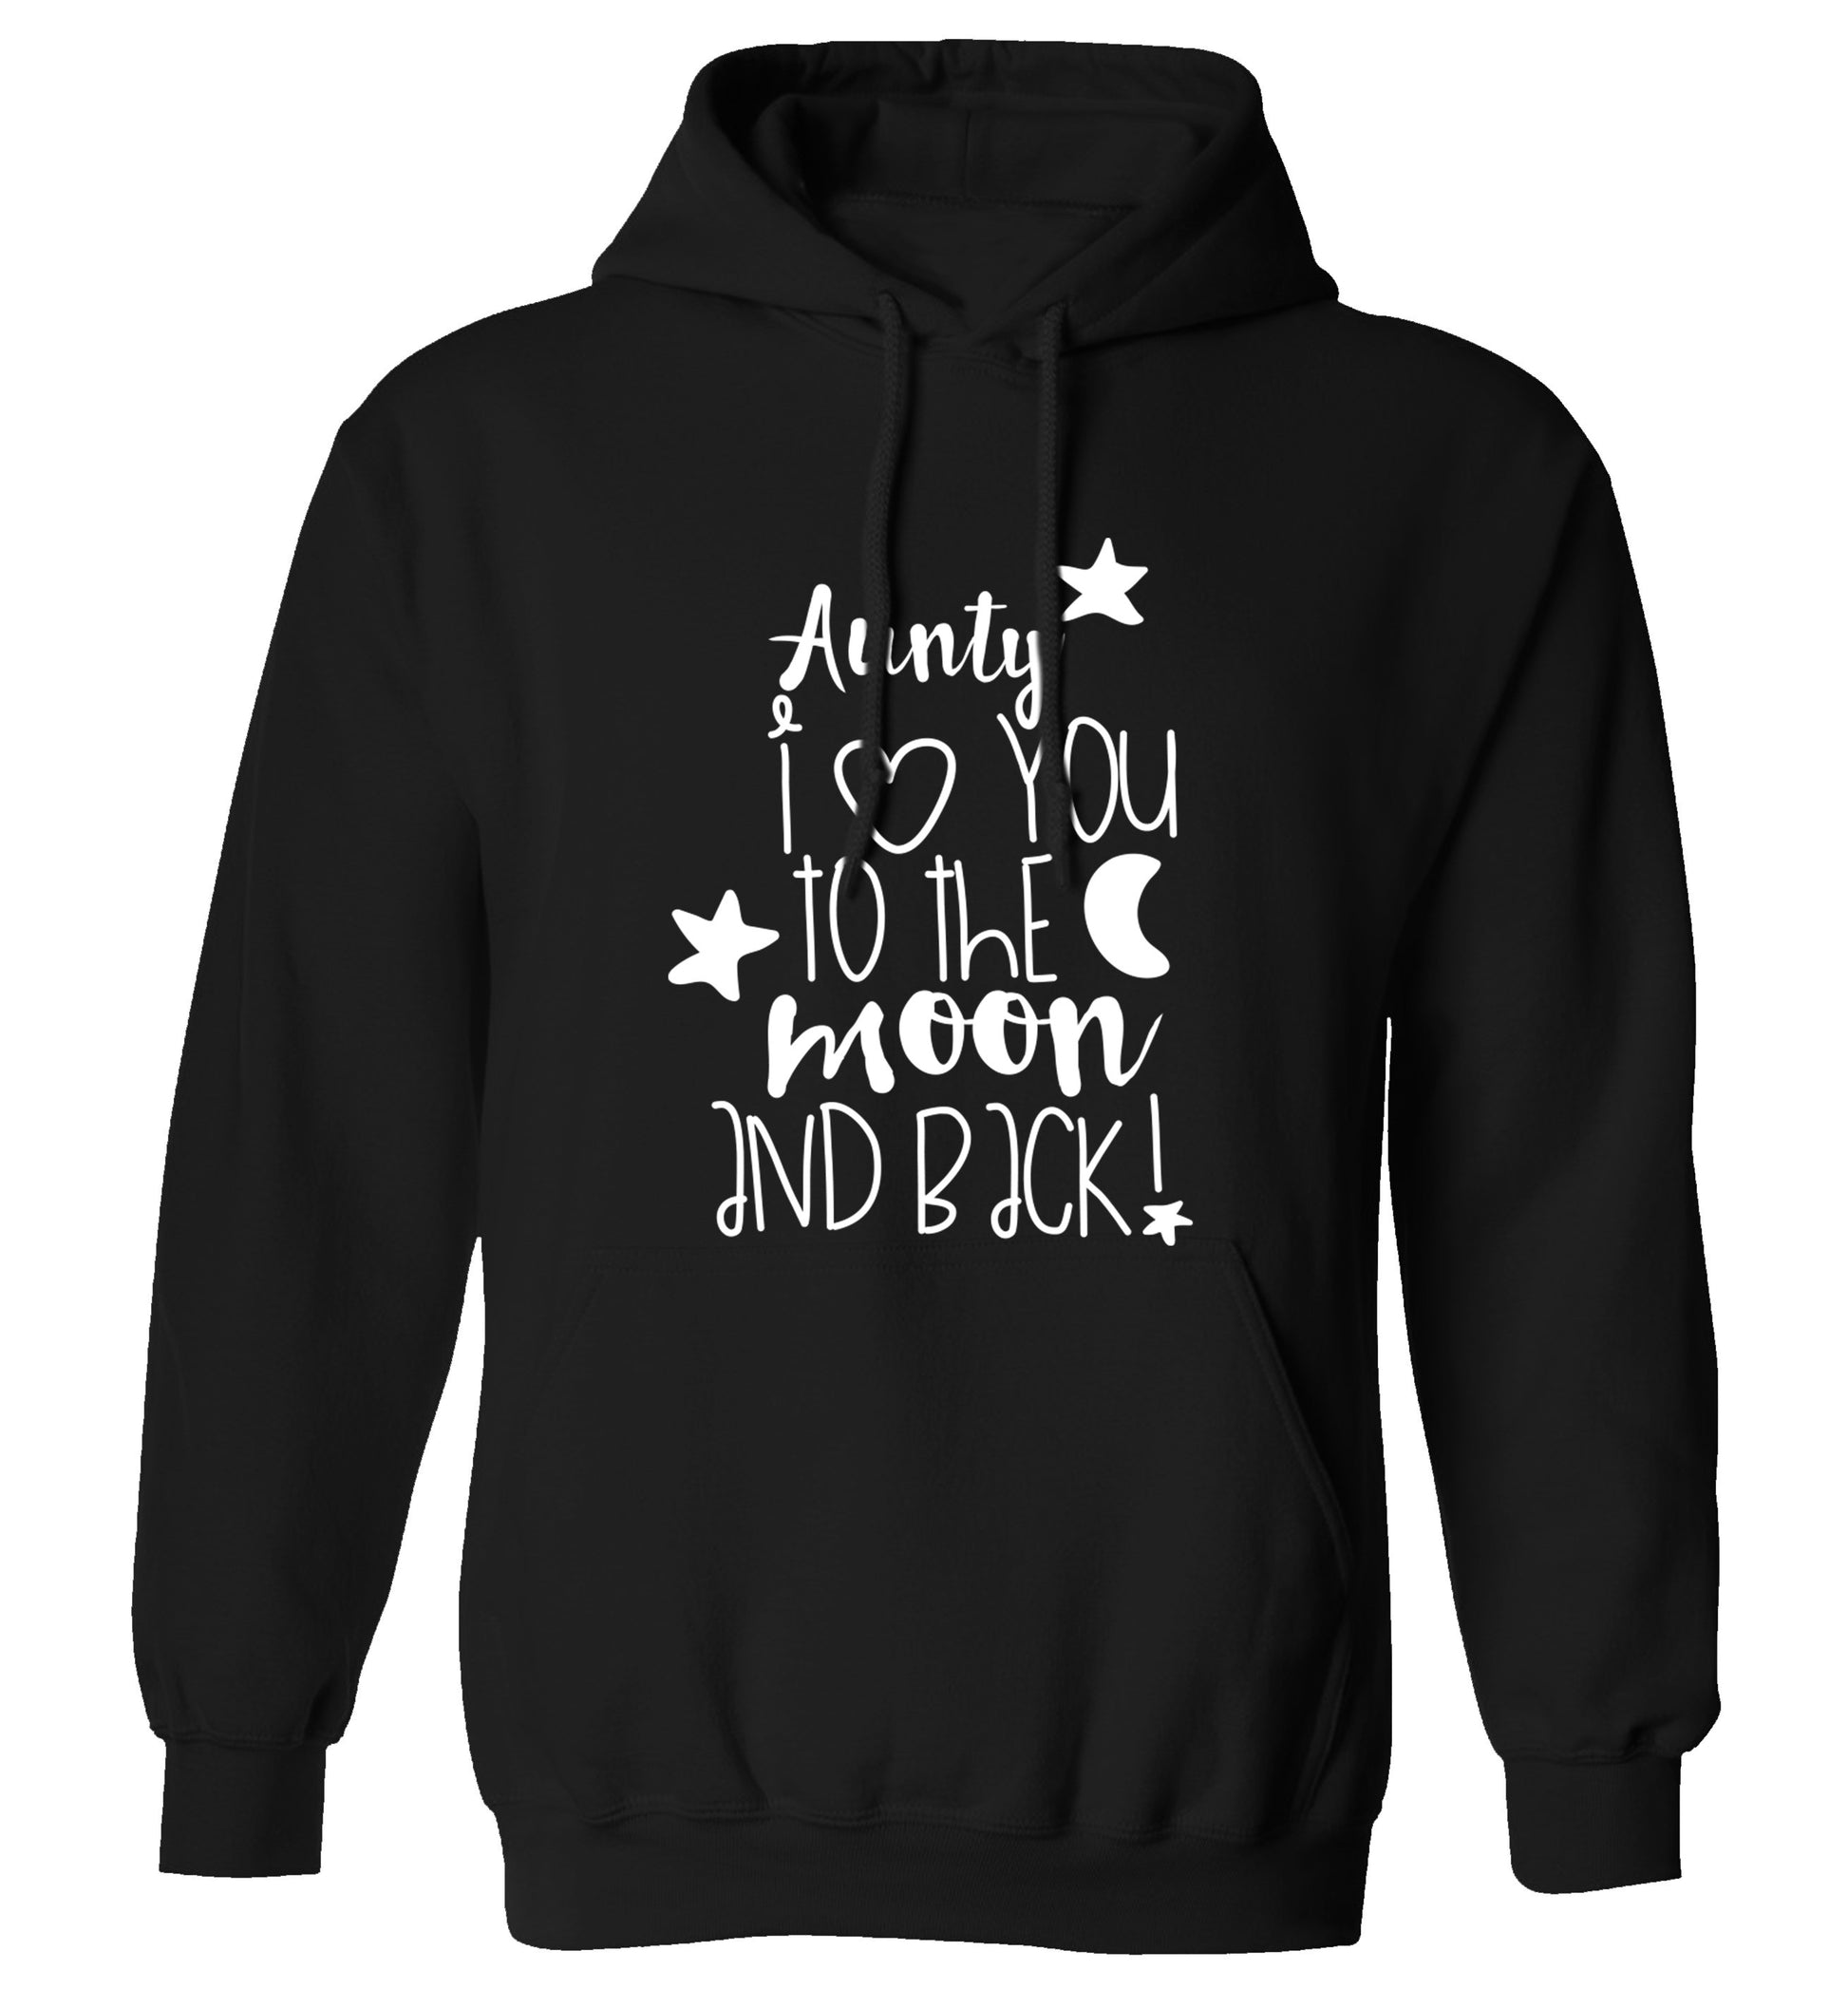 Aunty I love you to the moon and back adults unisex black hoodie 2XL